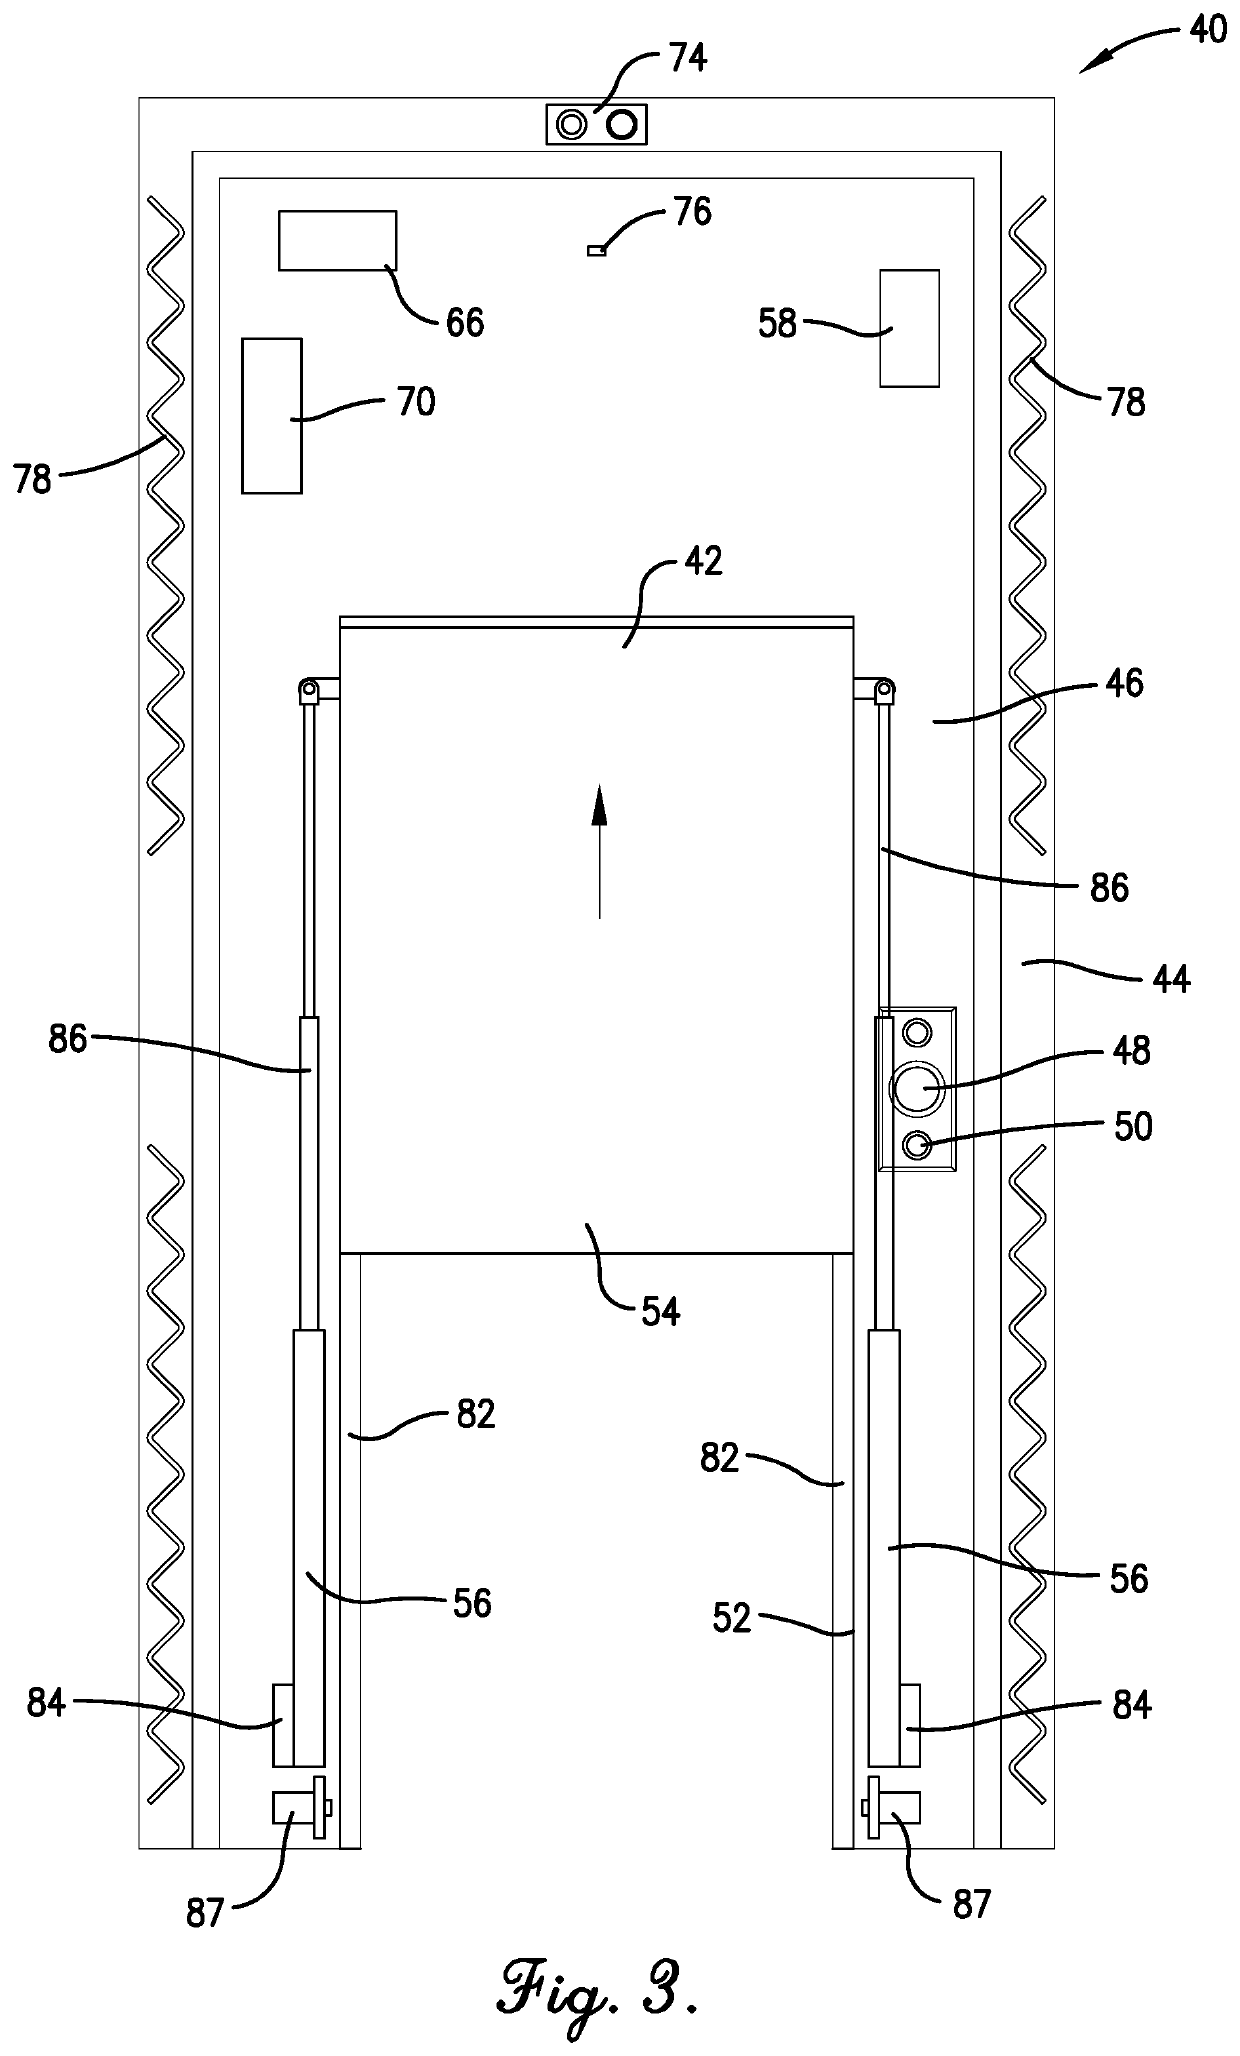 Shipping system and control system for secure package delivery